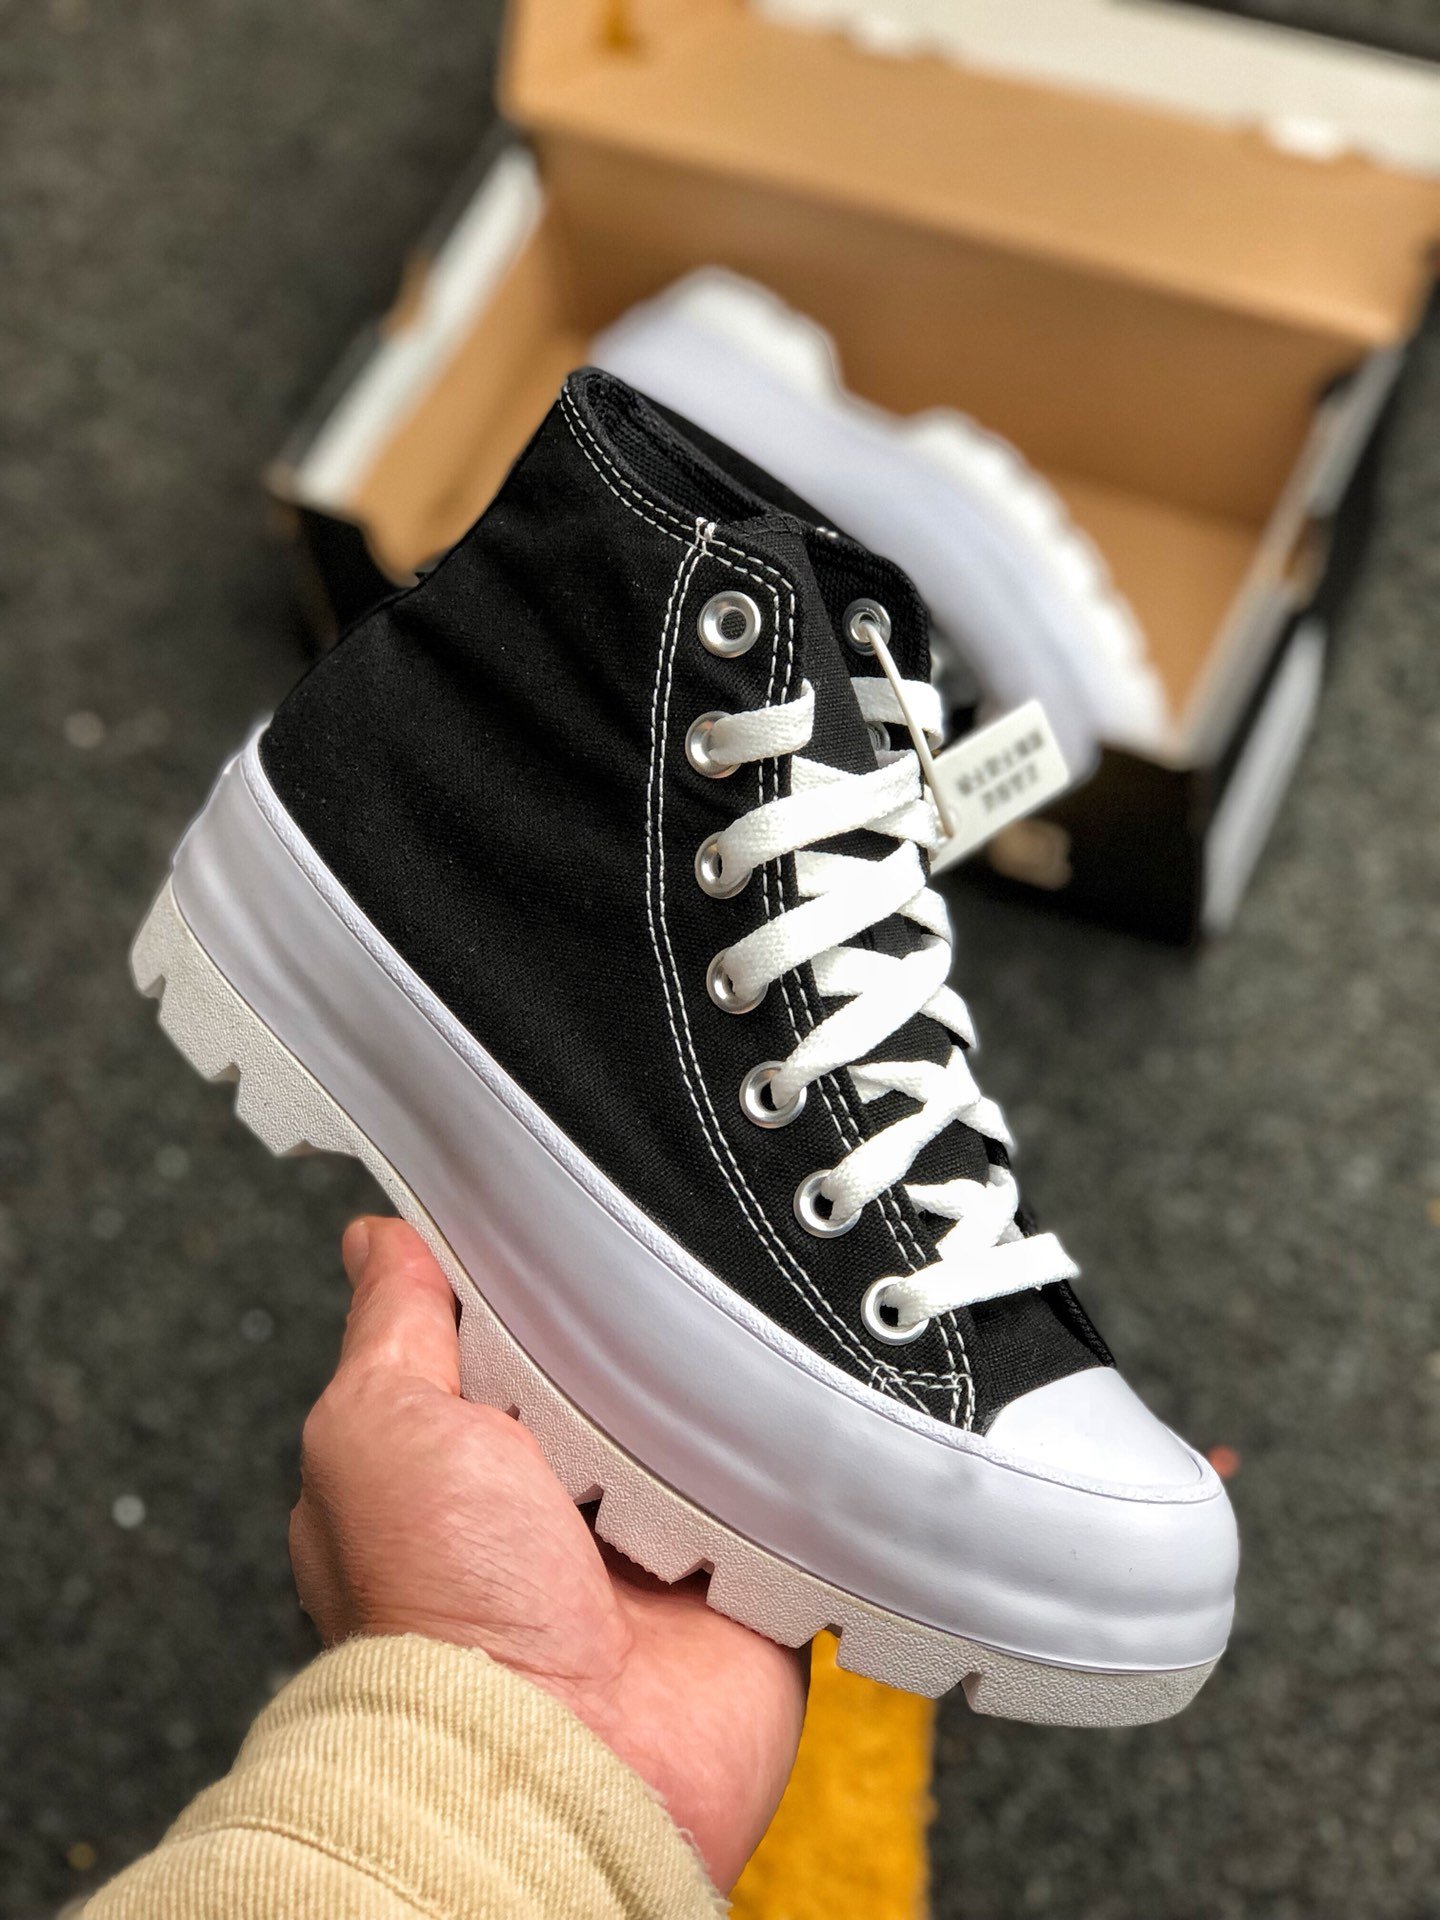 Converse Chuck Taylor All Star Lugged High Top Black/White/Black Shoes